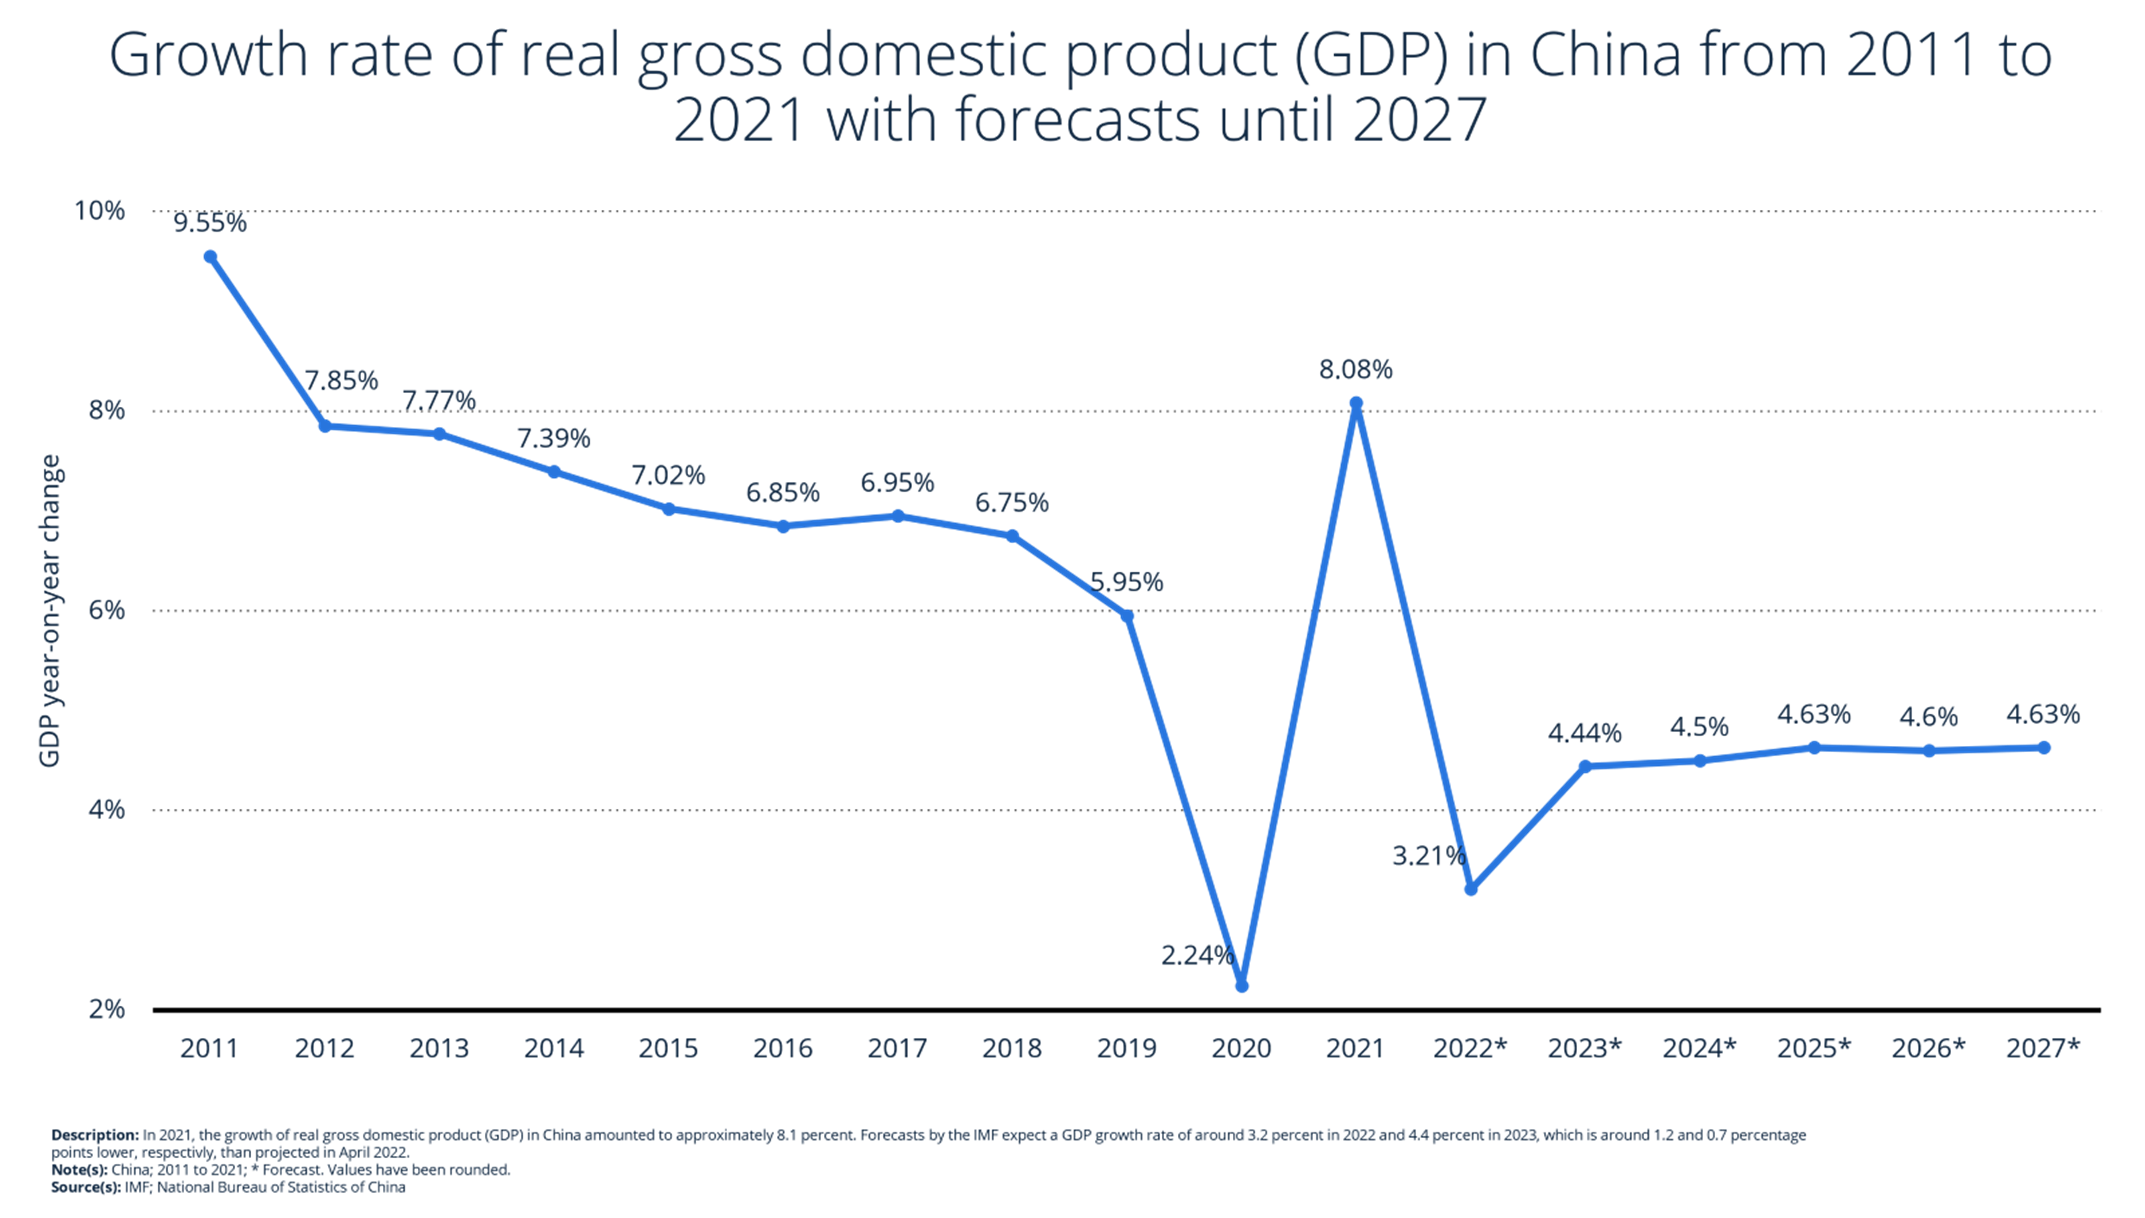 China: leading cosmetics brands market share by product type 2014